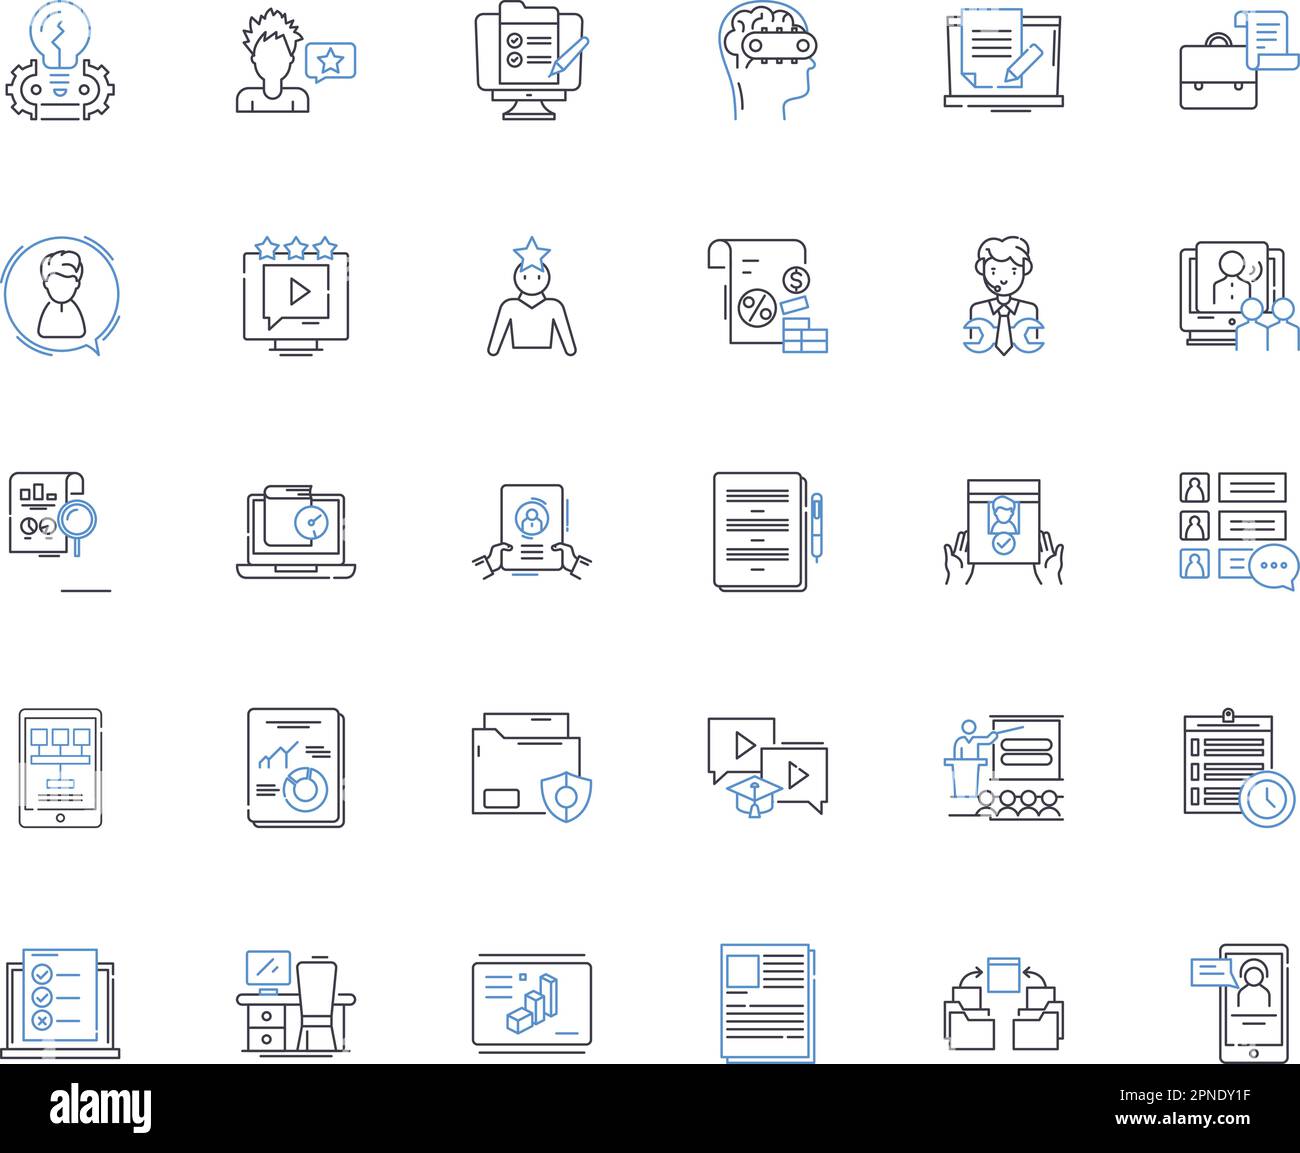 News reporting line icons collection. Journalism, Current events, Headlines, Breaking news, Investigative, Fact-checking, Scoops vector and linear Stock Vector